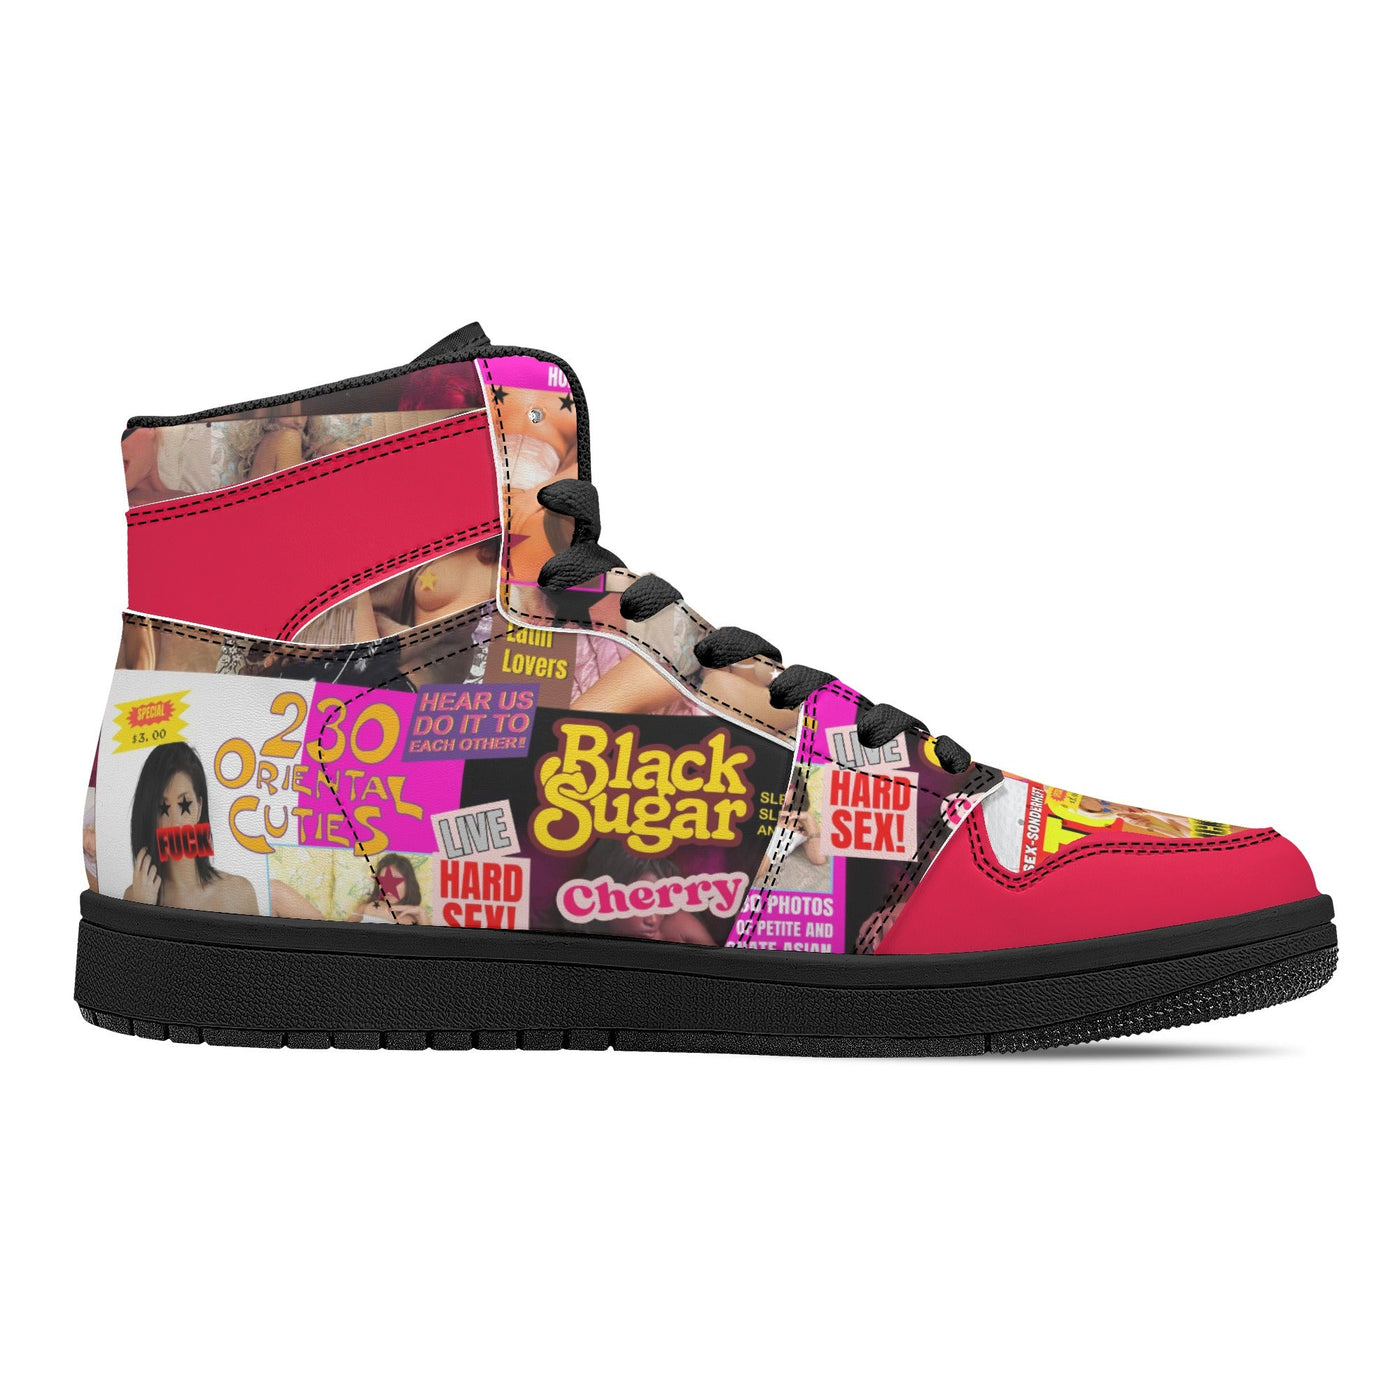 Tyler Durden Black Sugar High Top Sneakers - Inspired by Fight Club